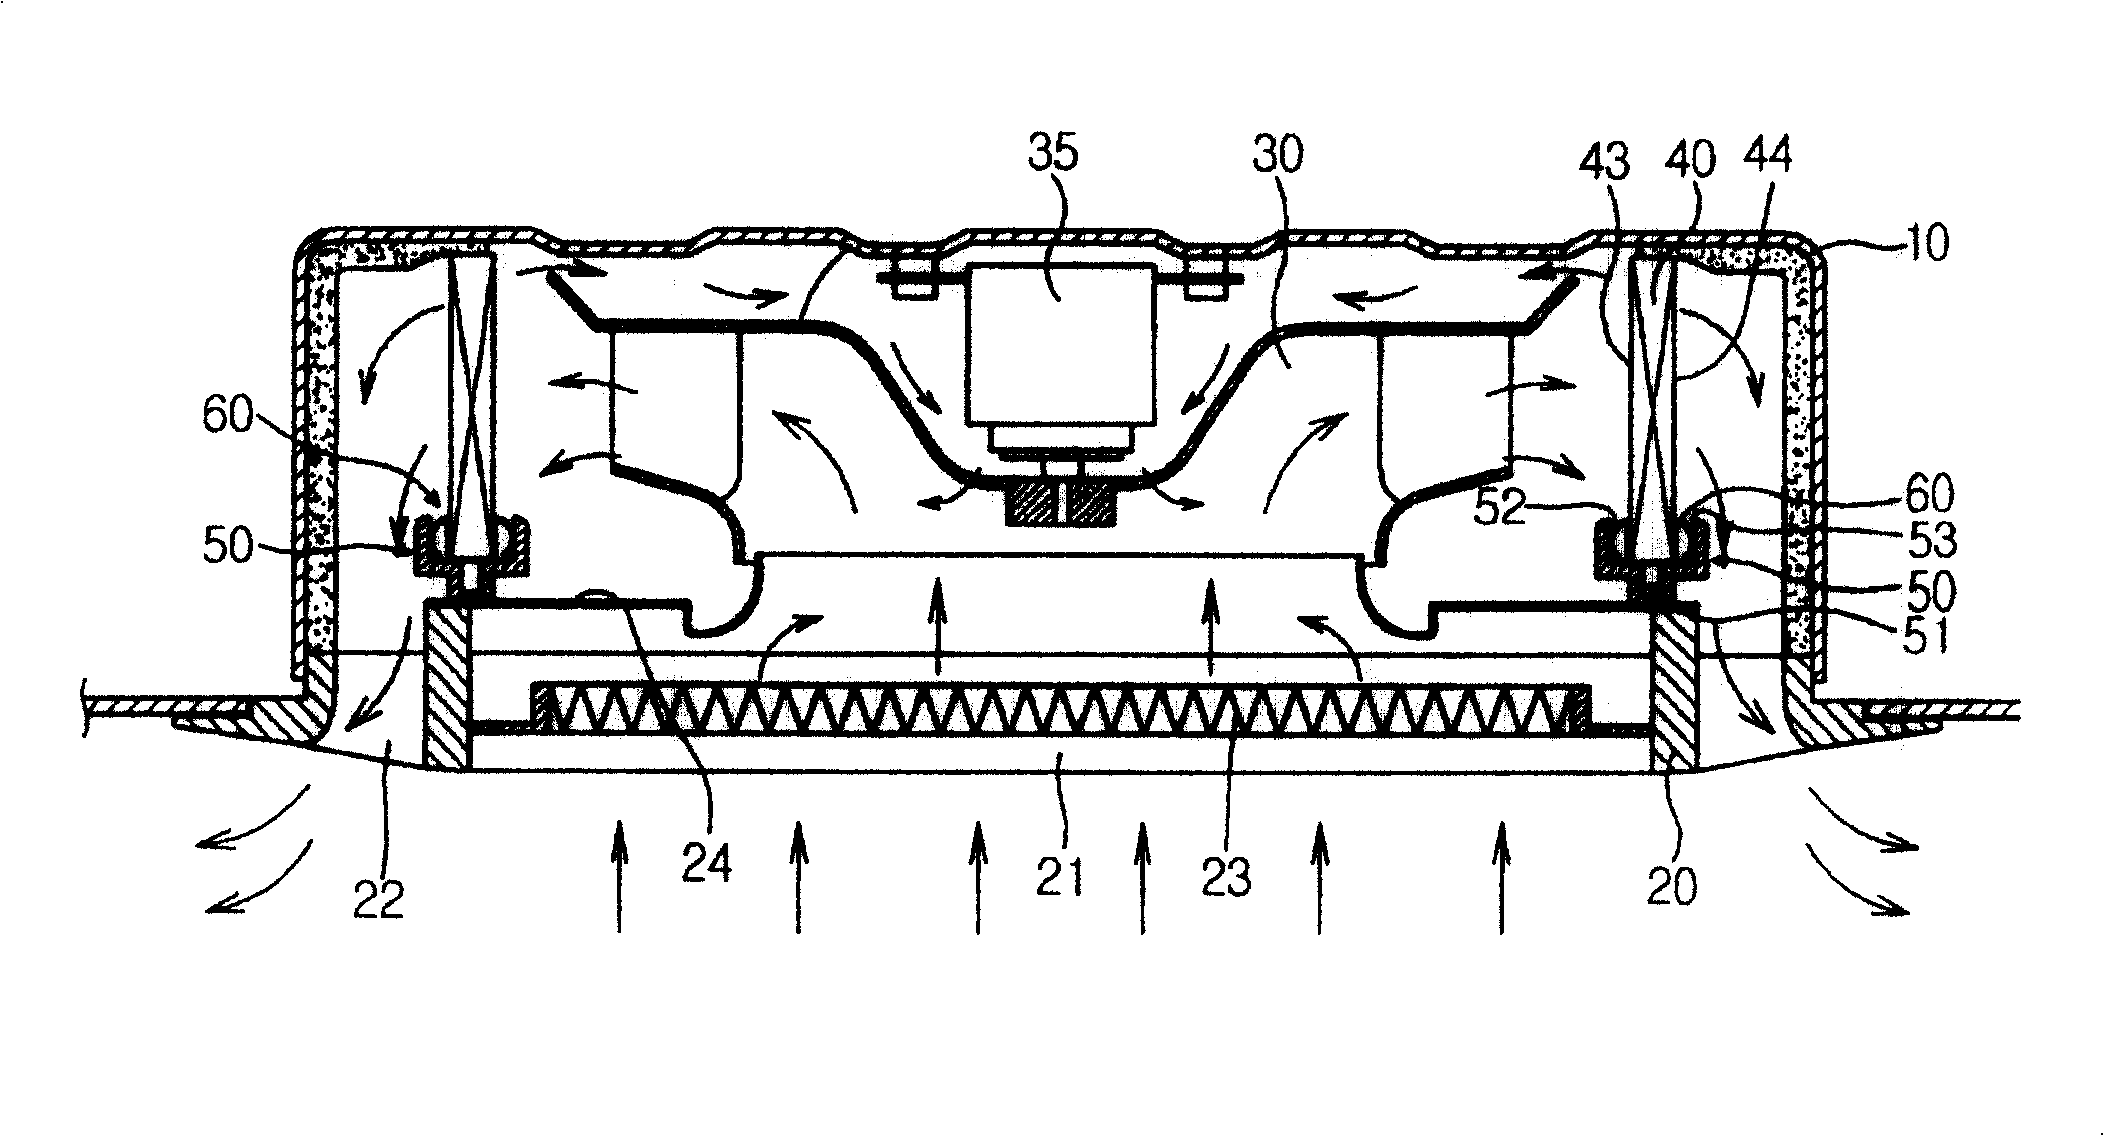 Heat exchanger bracket and air conditioner within the same